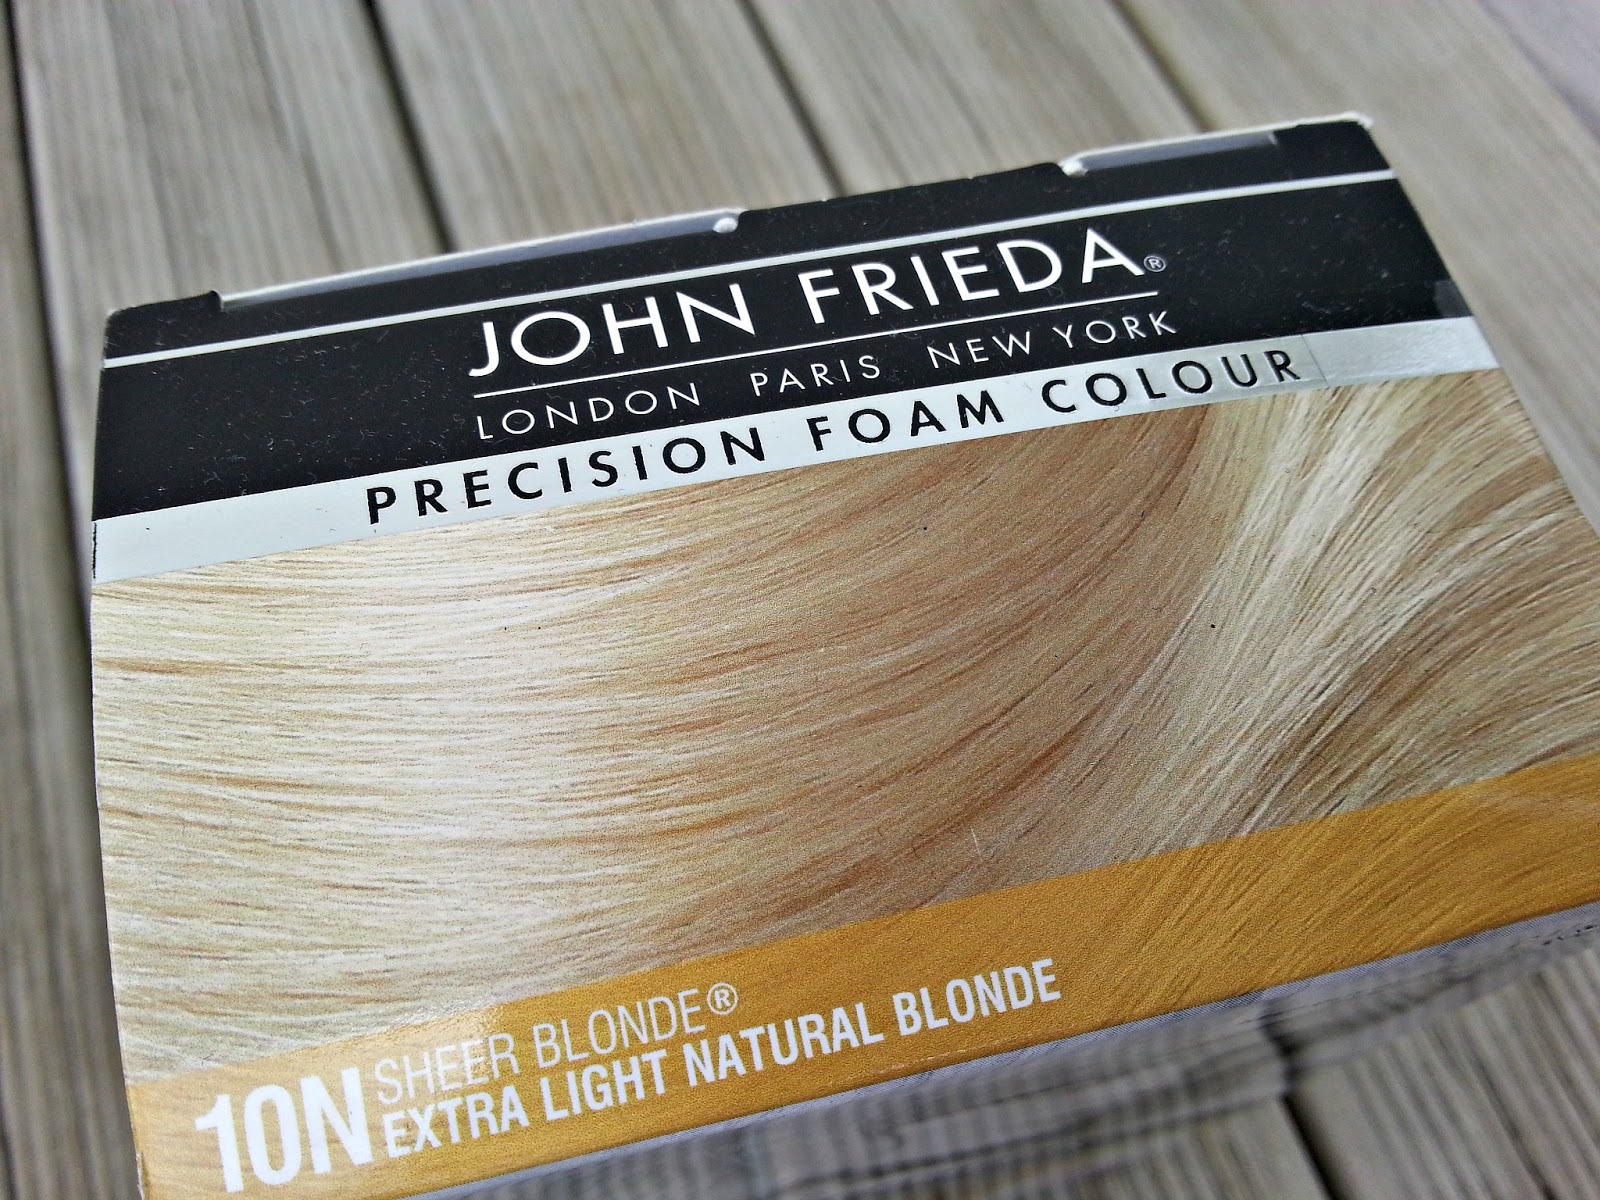 8. John Frieda Precision Foam Colour, Medium Natural Blonde 8N, Full-coverage Hair Color Kit, with Thick Foam for Deep Color Saturation - wide 3